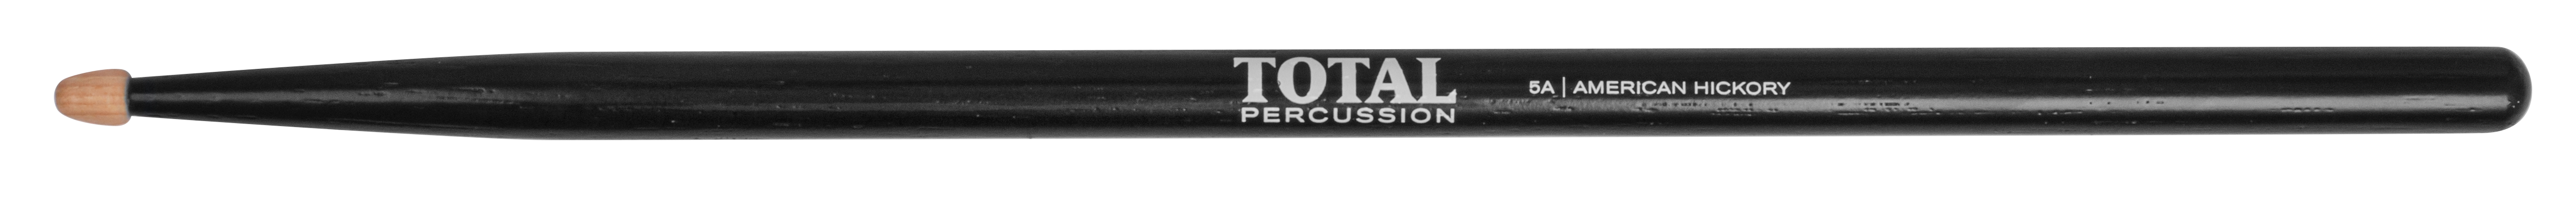 Total Percussion Hickory Series Drumsticks - Color Series